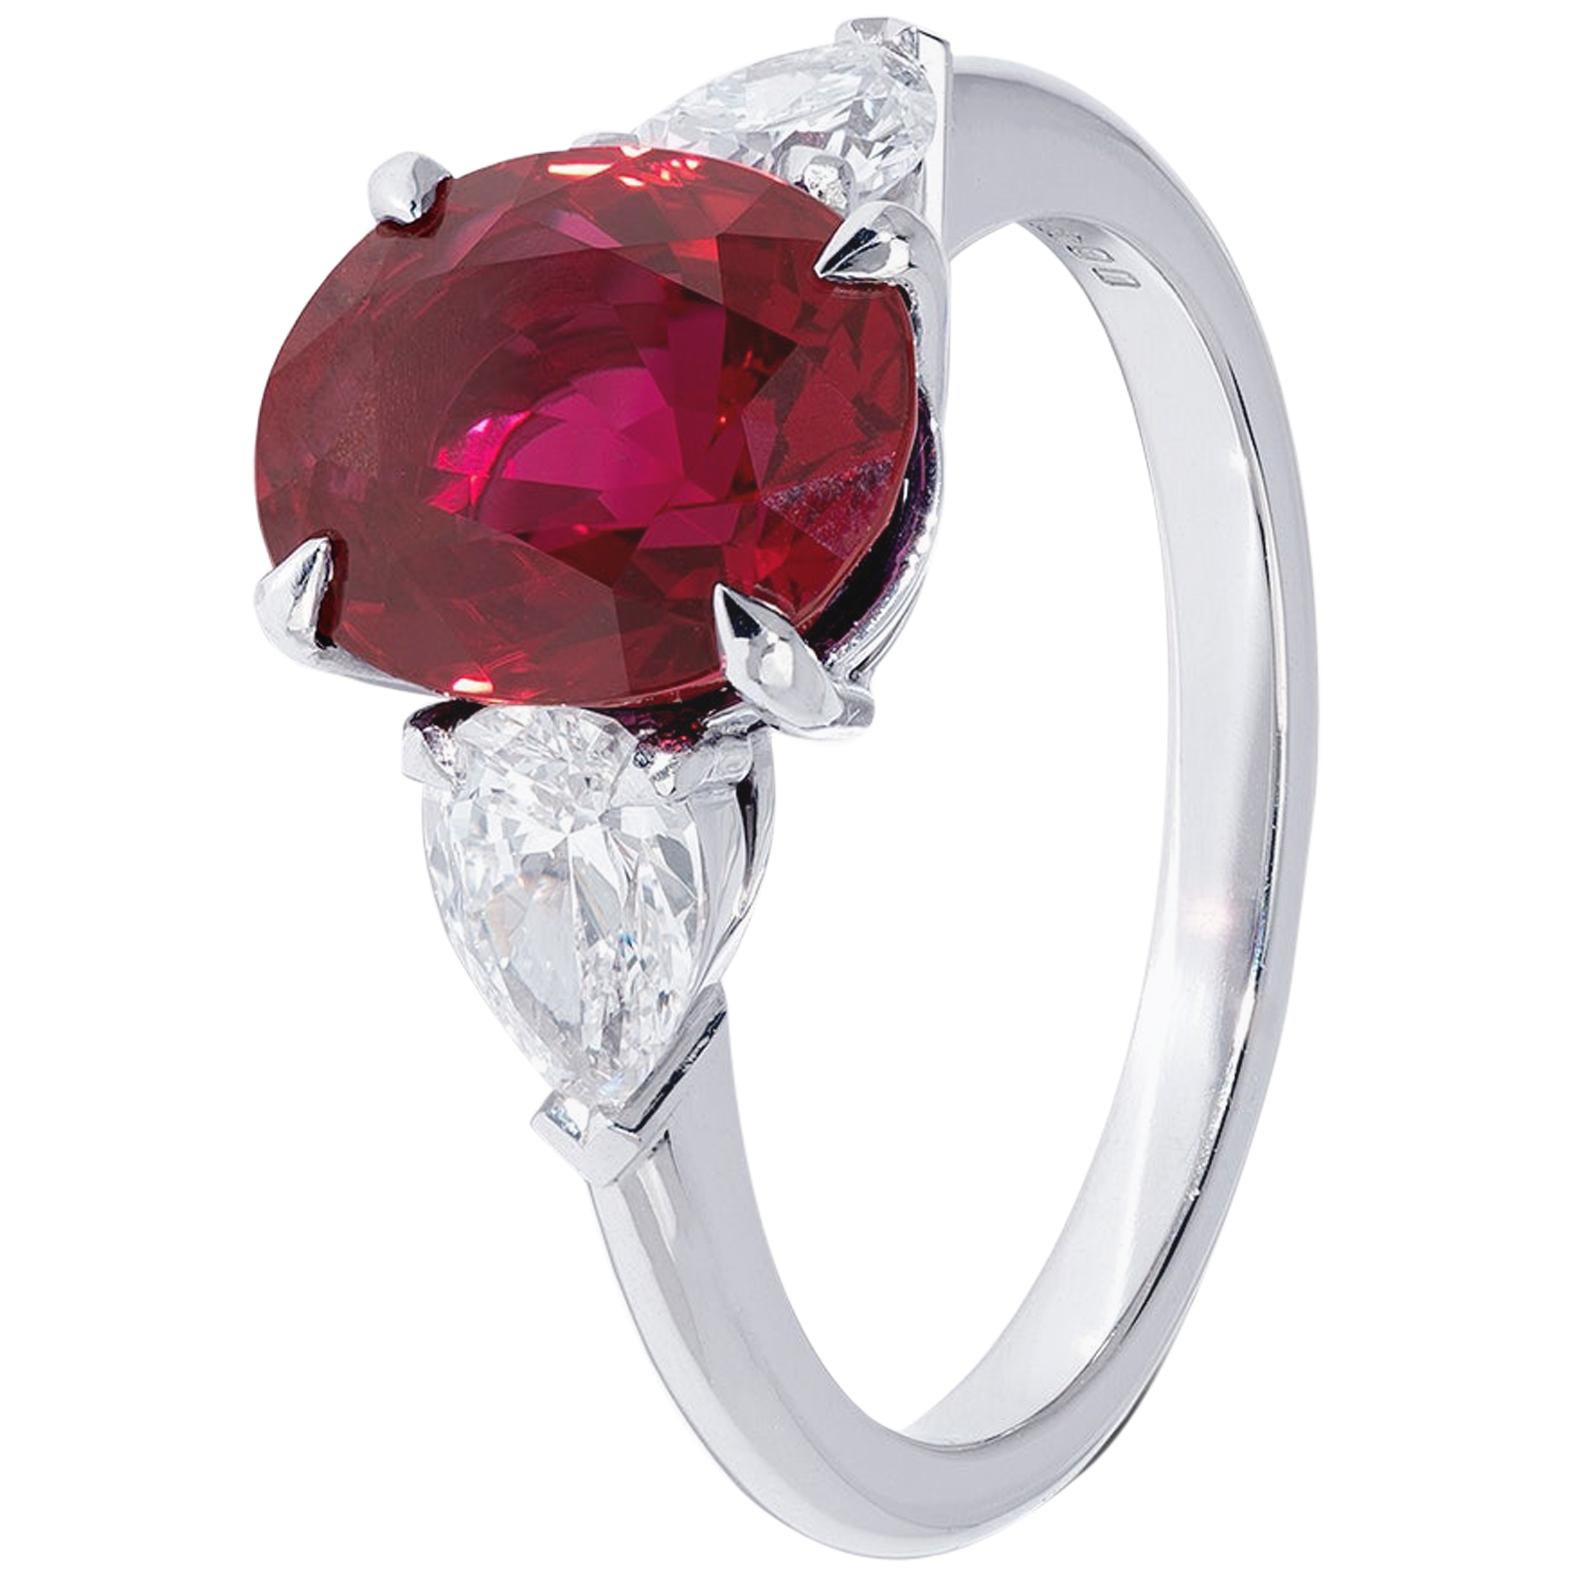 GRS Certified Vivid 3.17 Carat Red Ruby Ring with White Diamonds on Platinum